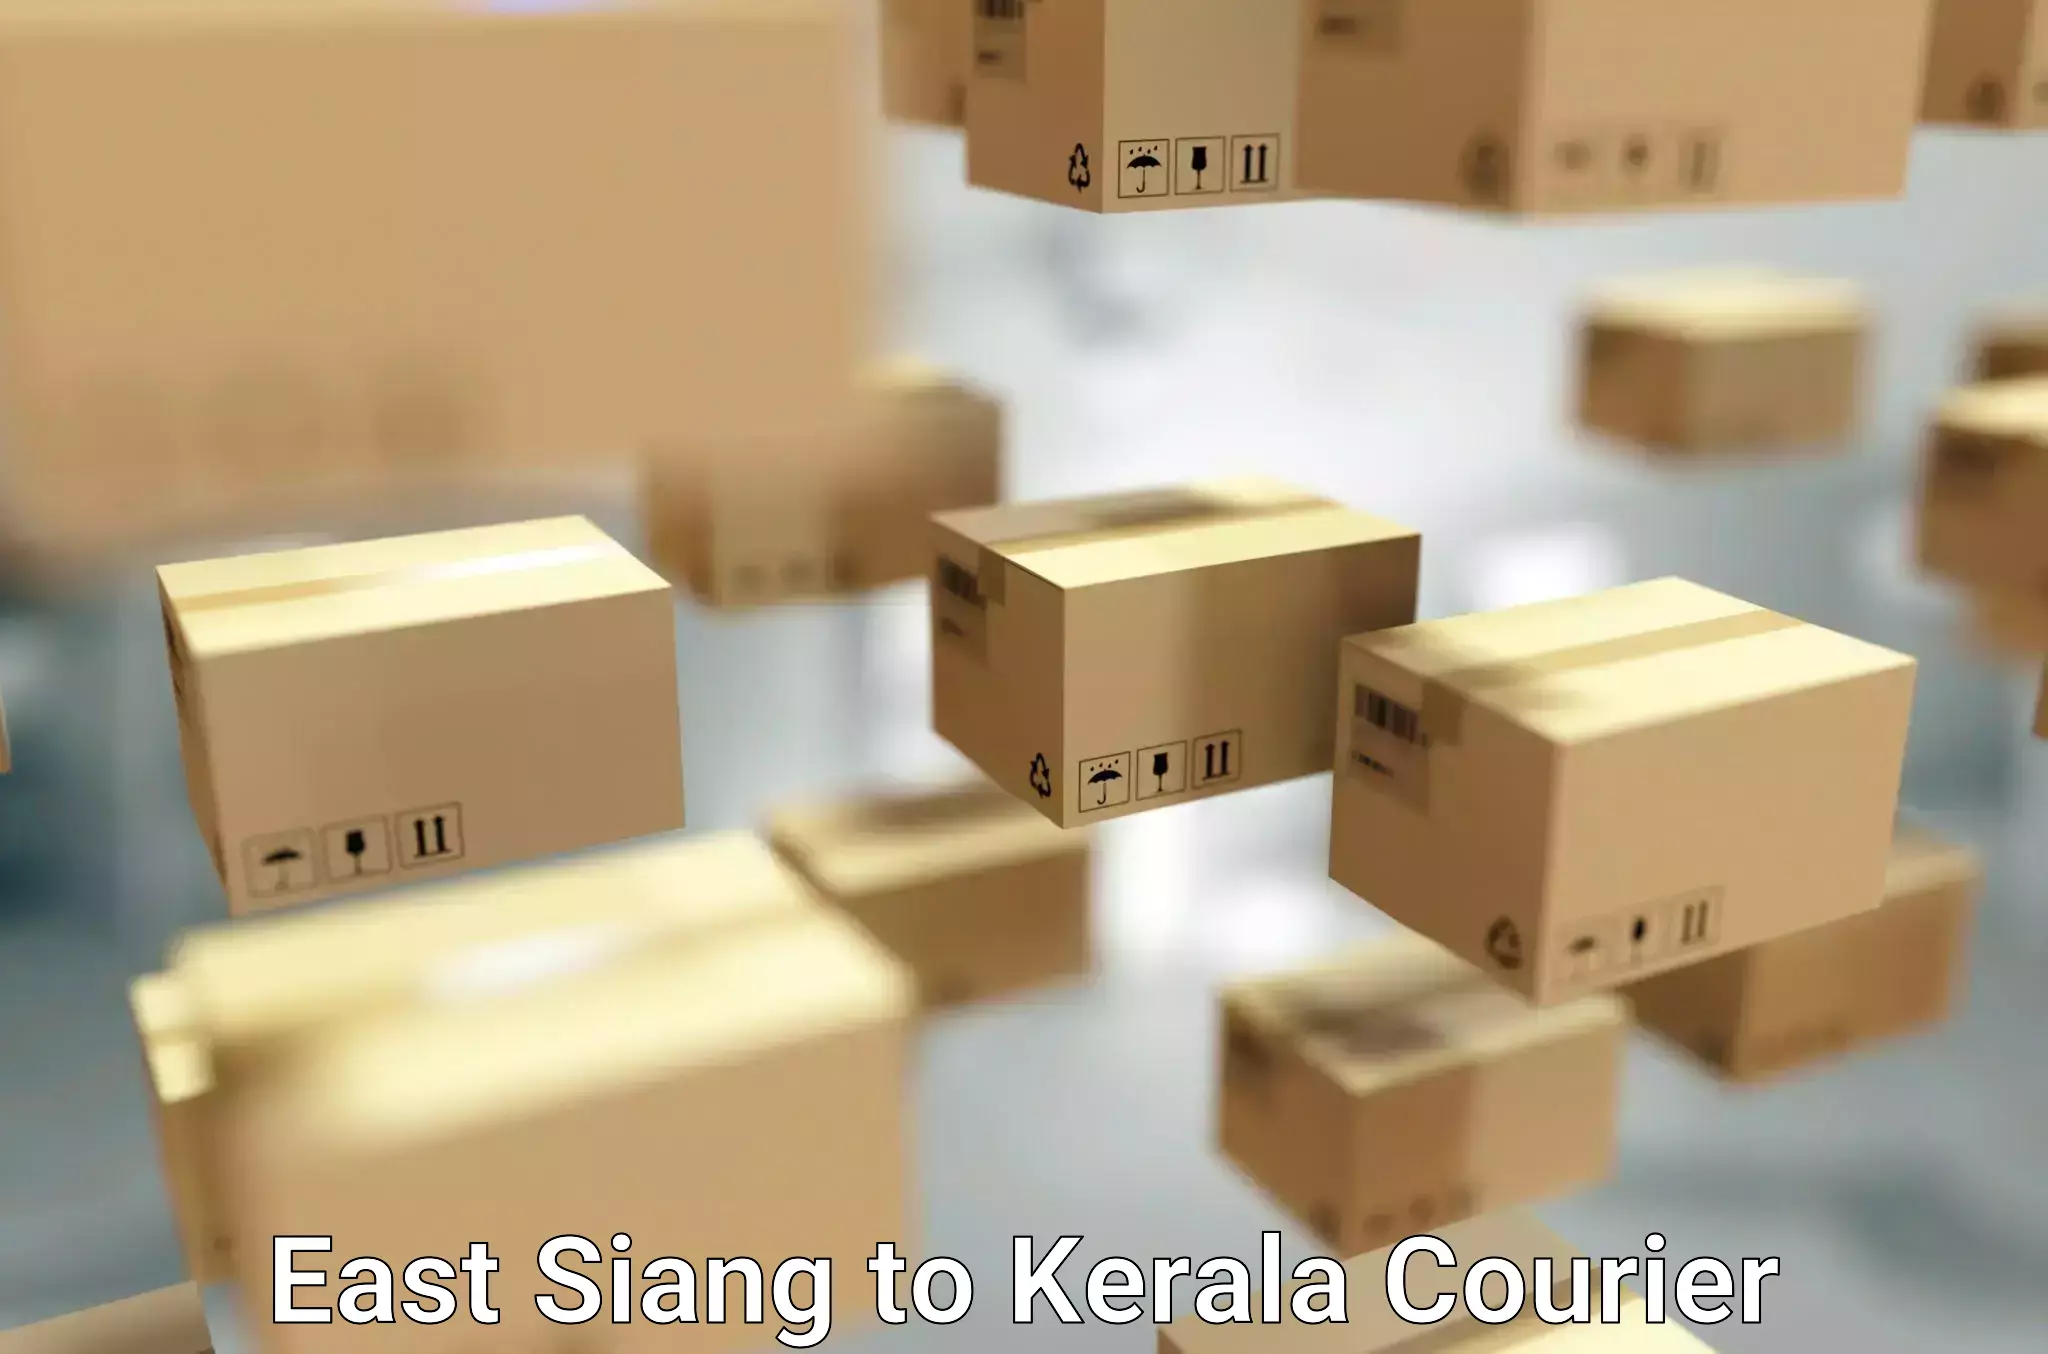 Hassle-free relocation East Siang to Kerala